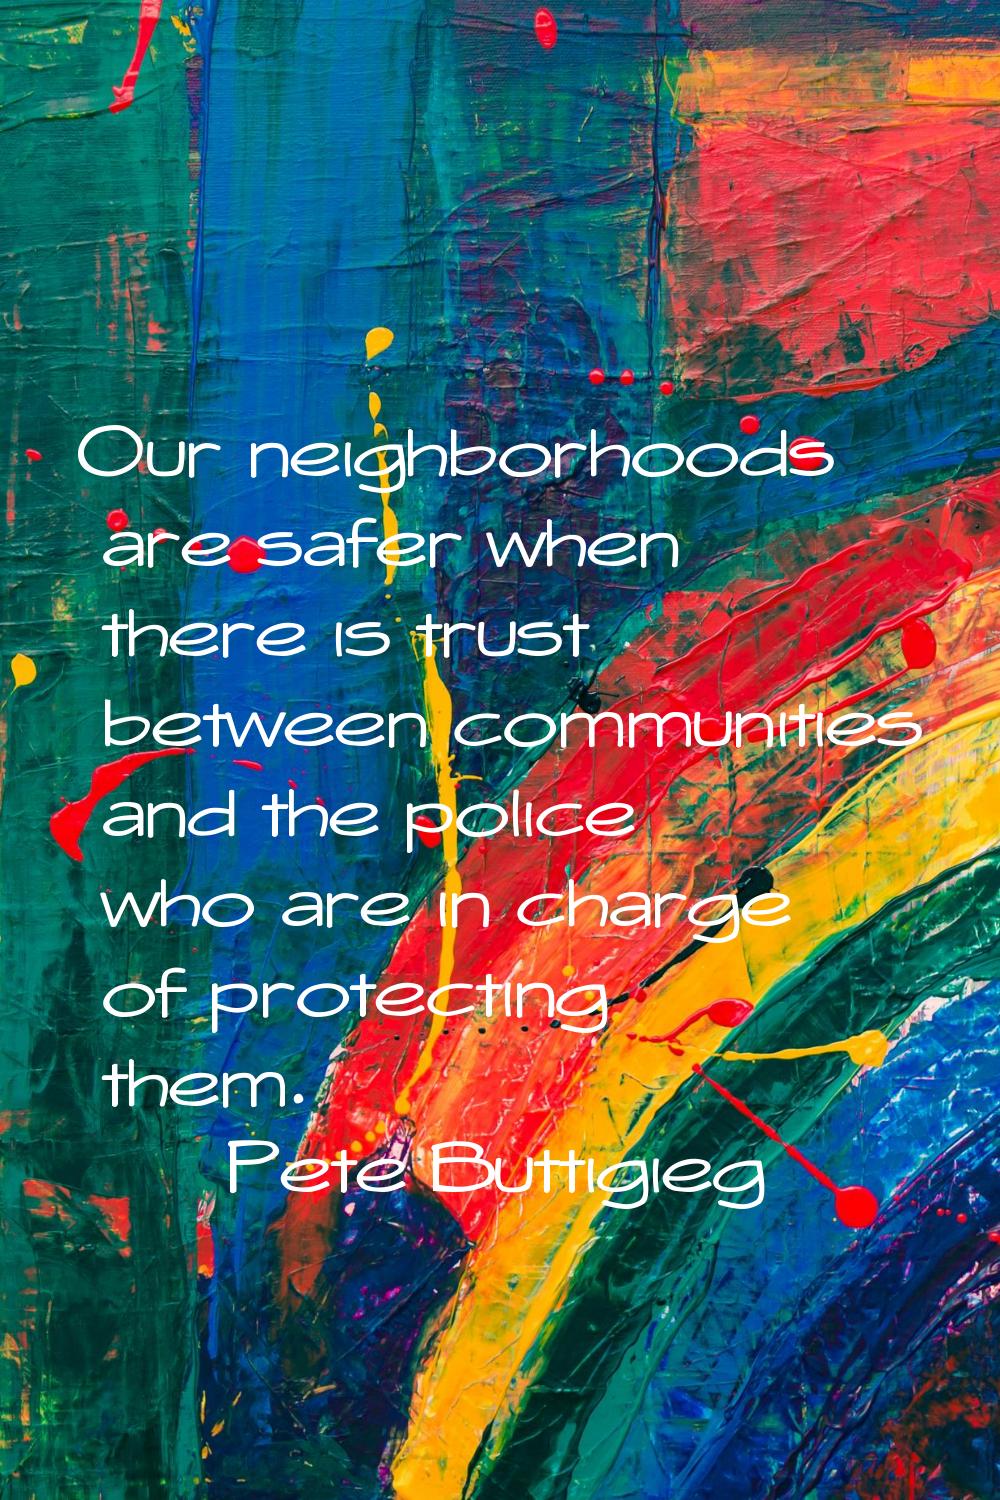 Our neighborhoods are safer when there is trust between communities and the police who are in charg